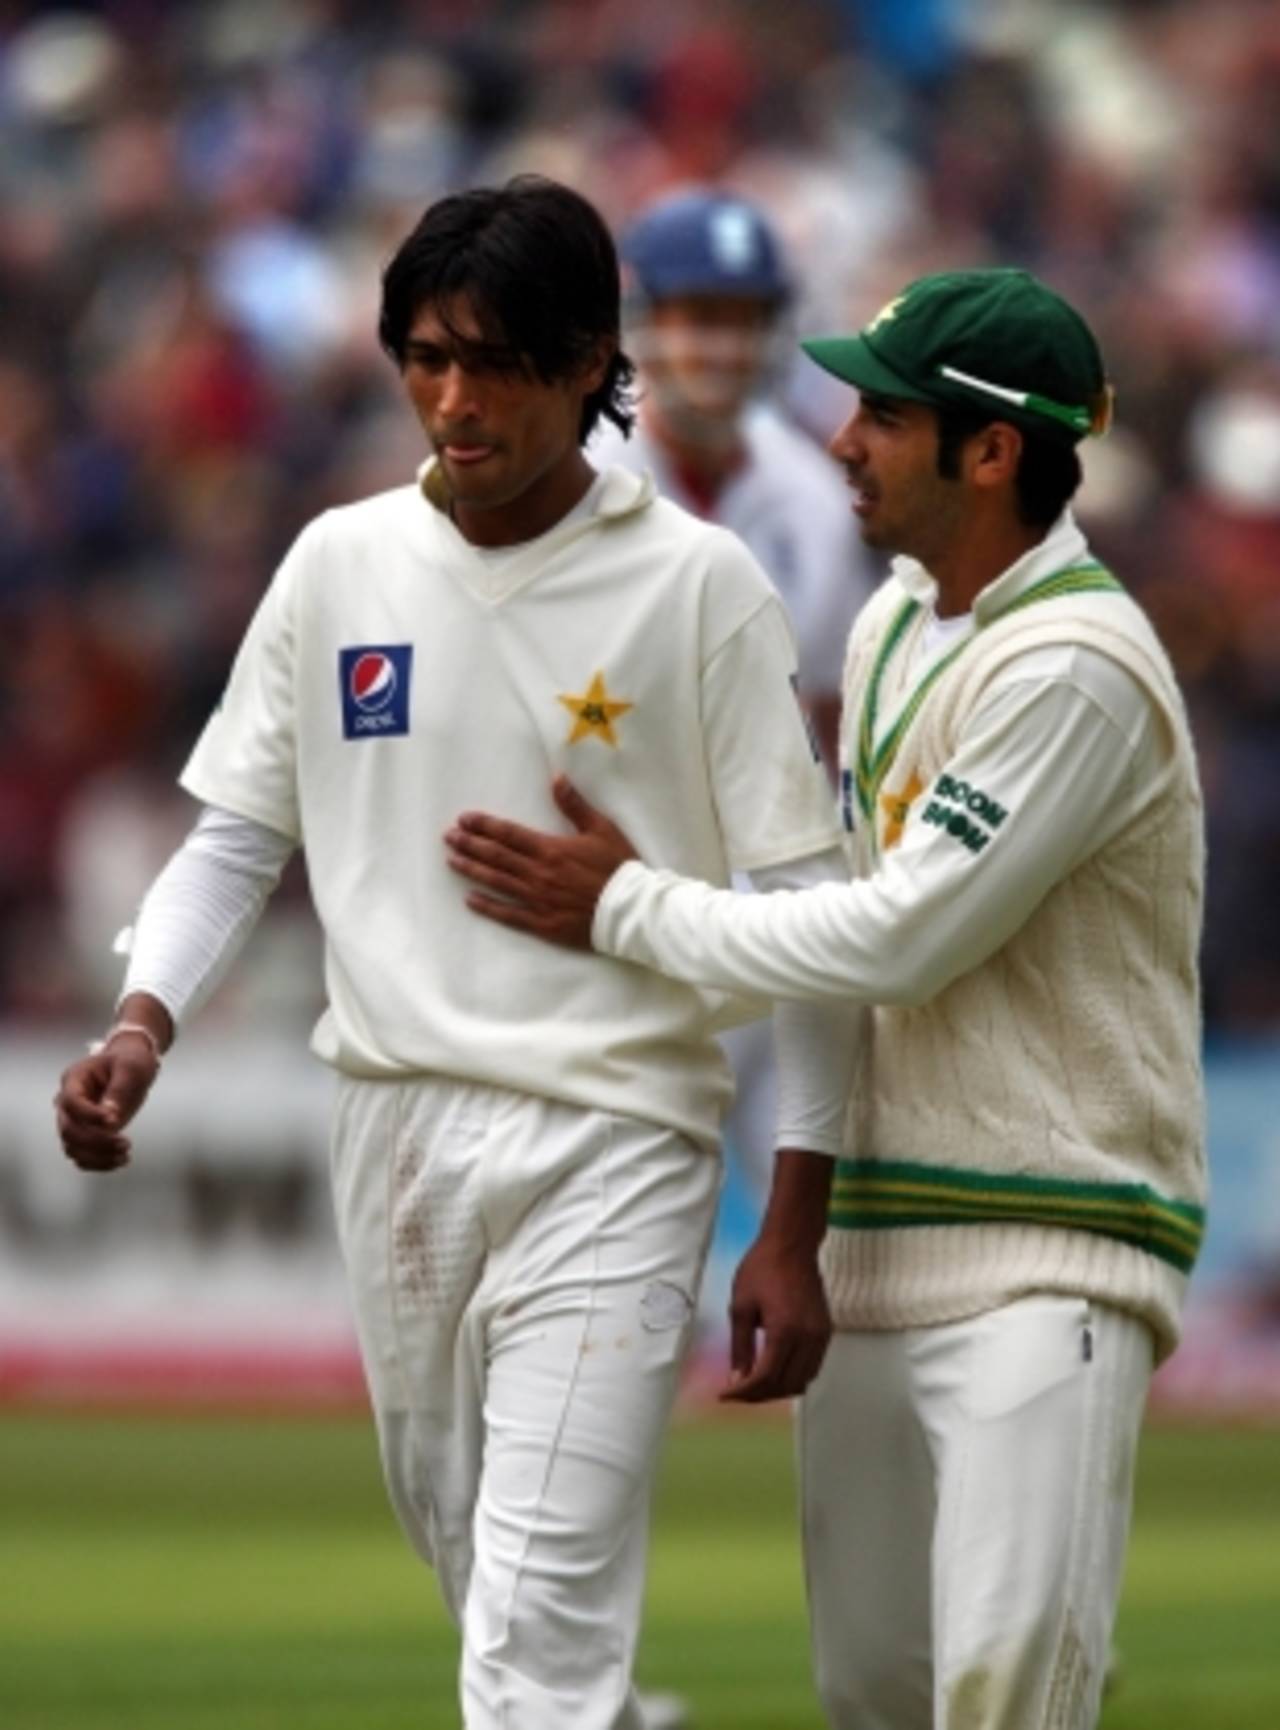 Salman Butt offers some support to Mohammad Amir on a tough first day for Pakistan, England v Pakistan, 2nd Test, Edgbaston, August 6, 2010